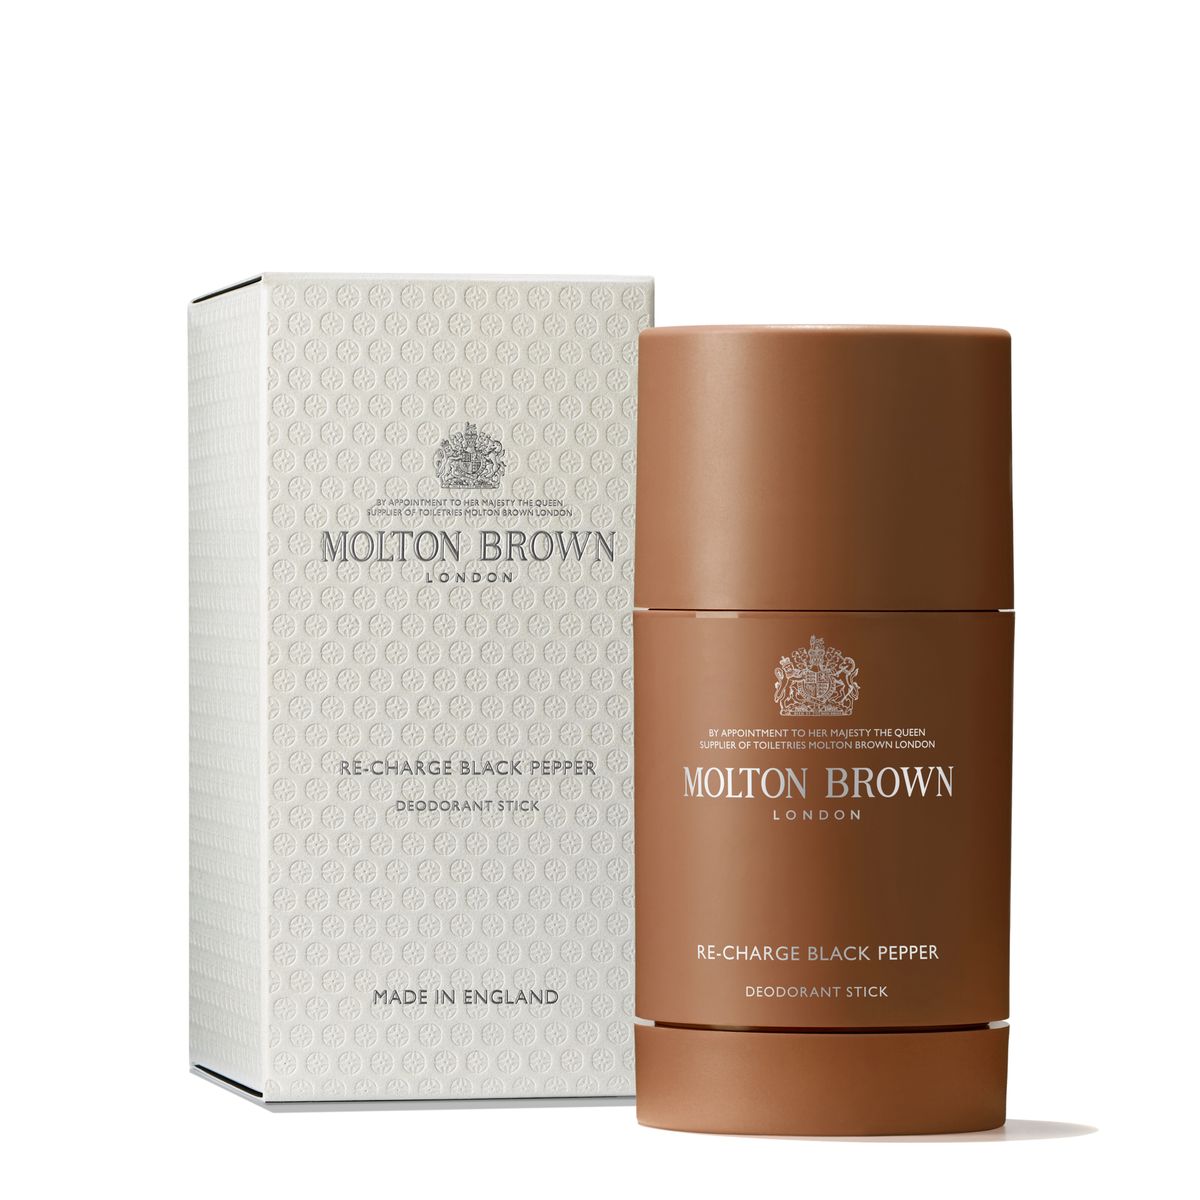 MOLTON BROWN RE-CHARGE BLACK PEPPER deo stick